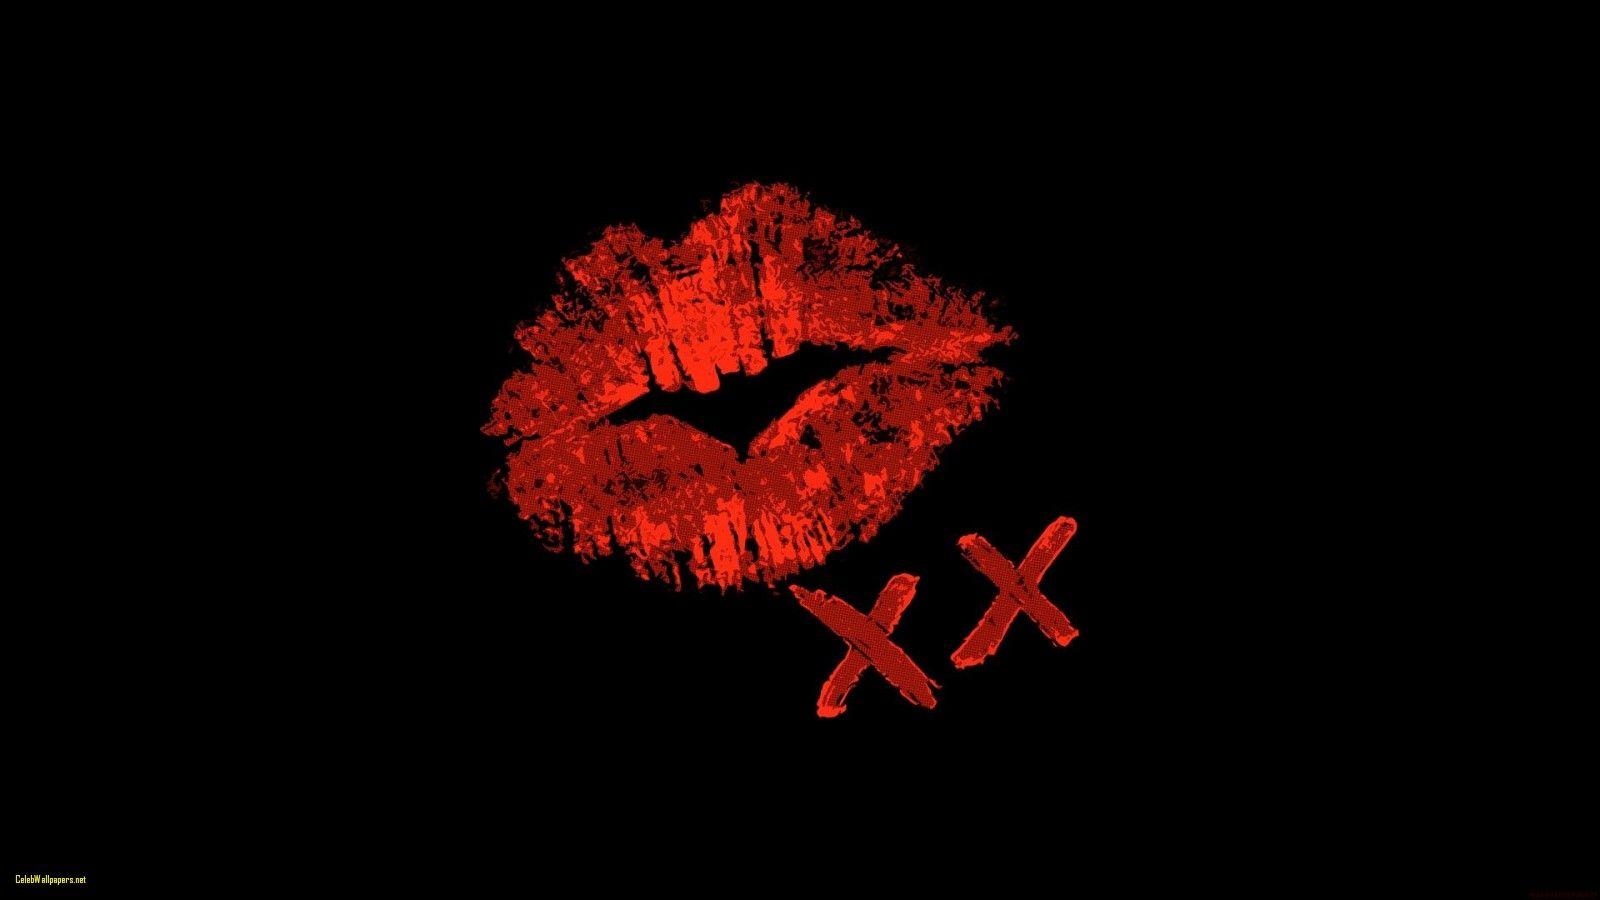 Wallpaper Red Lips Wallpaper Free Download Pic Wpe Lovely Lips Pic